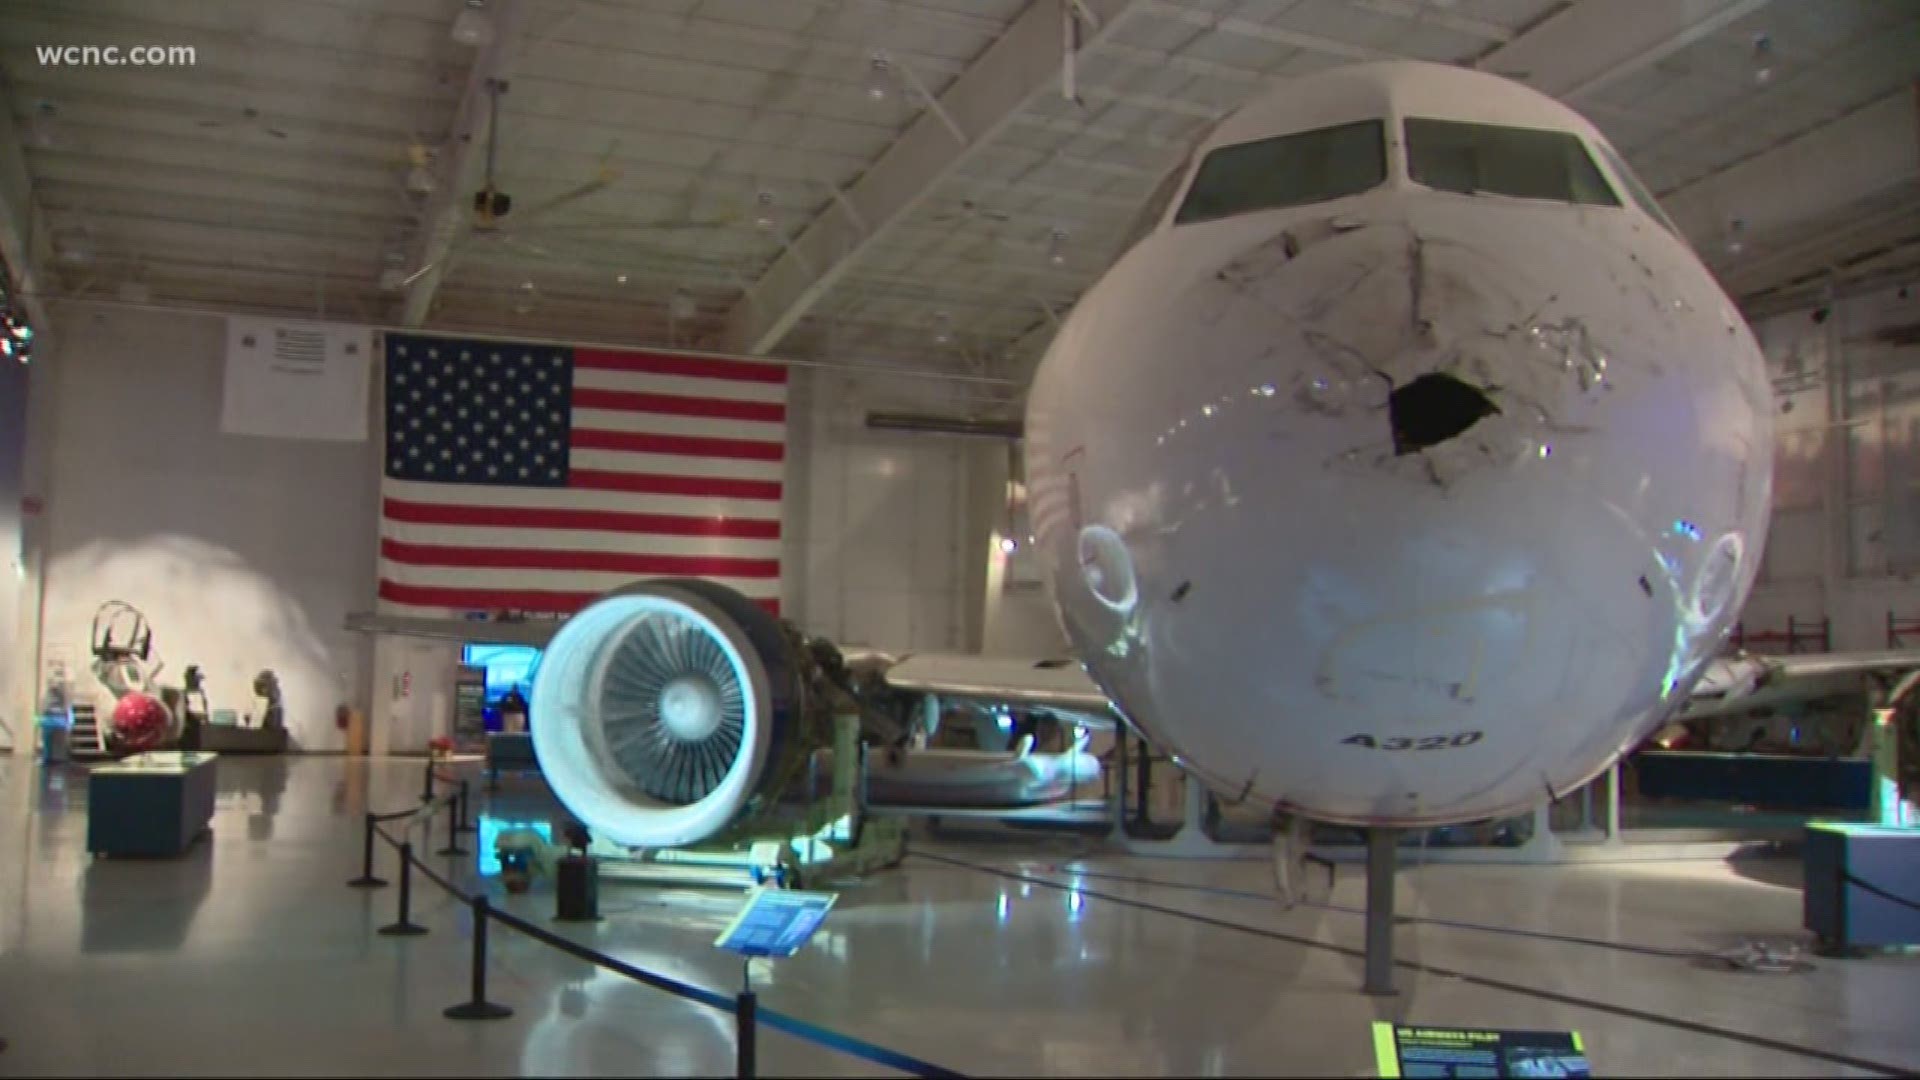 The plane is currently housed in a 40,000 square foot hangar at the Carolinas Aviation Museum.